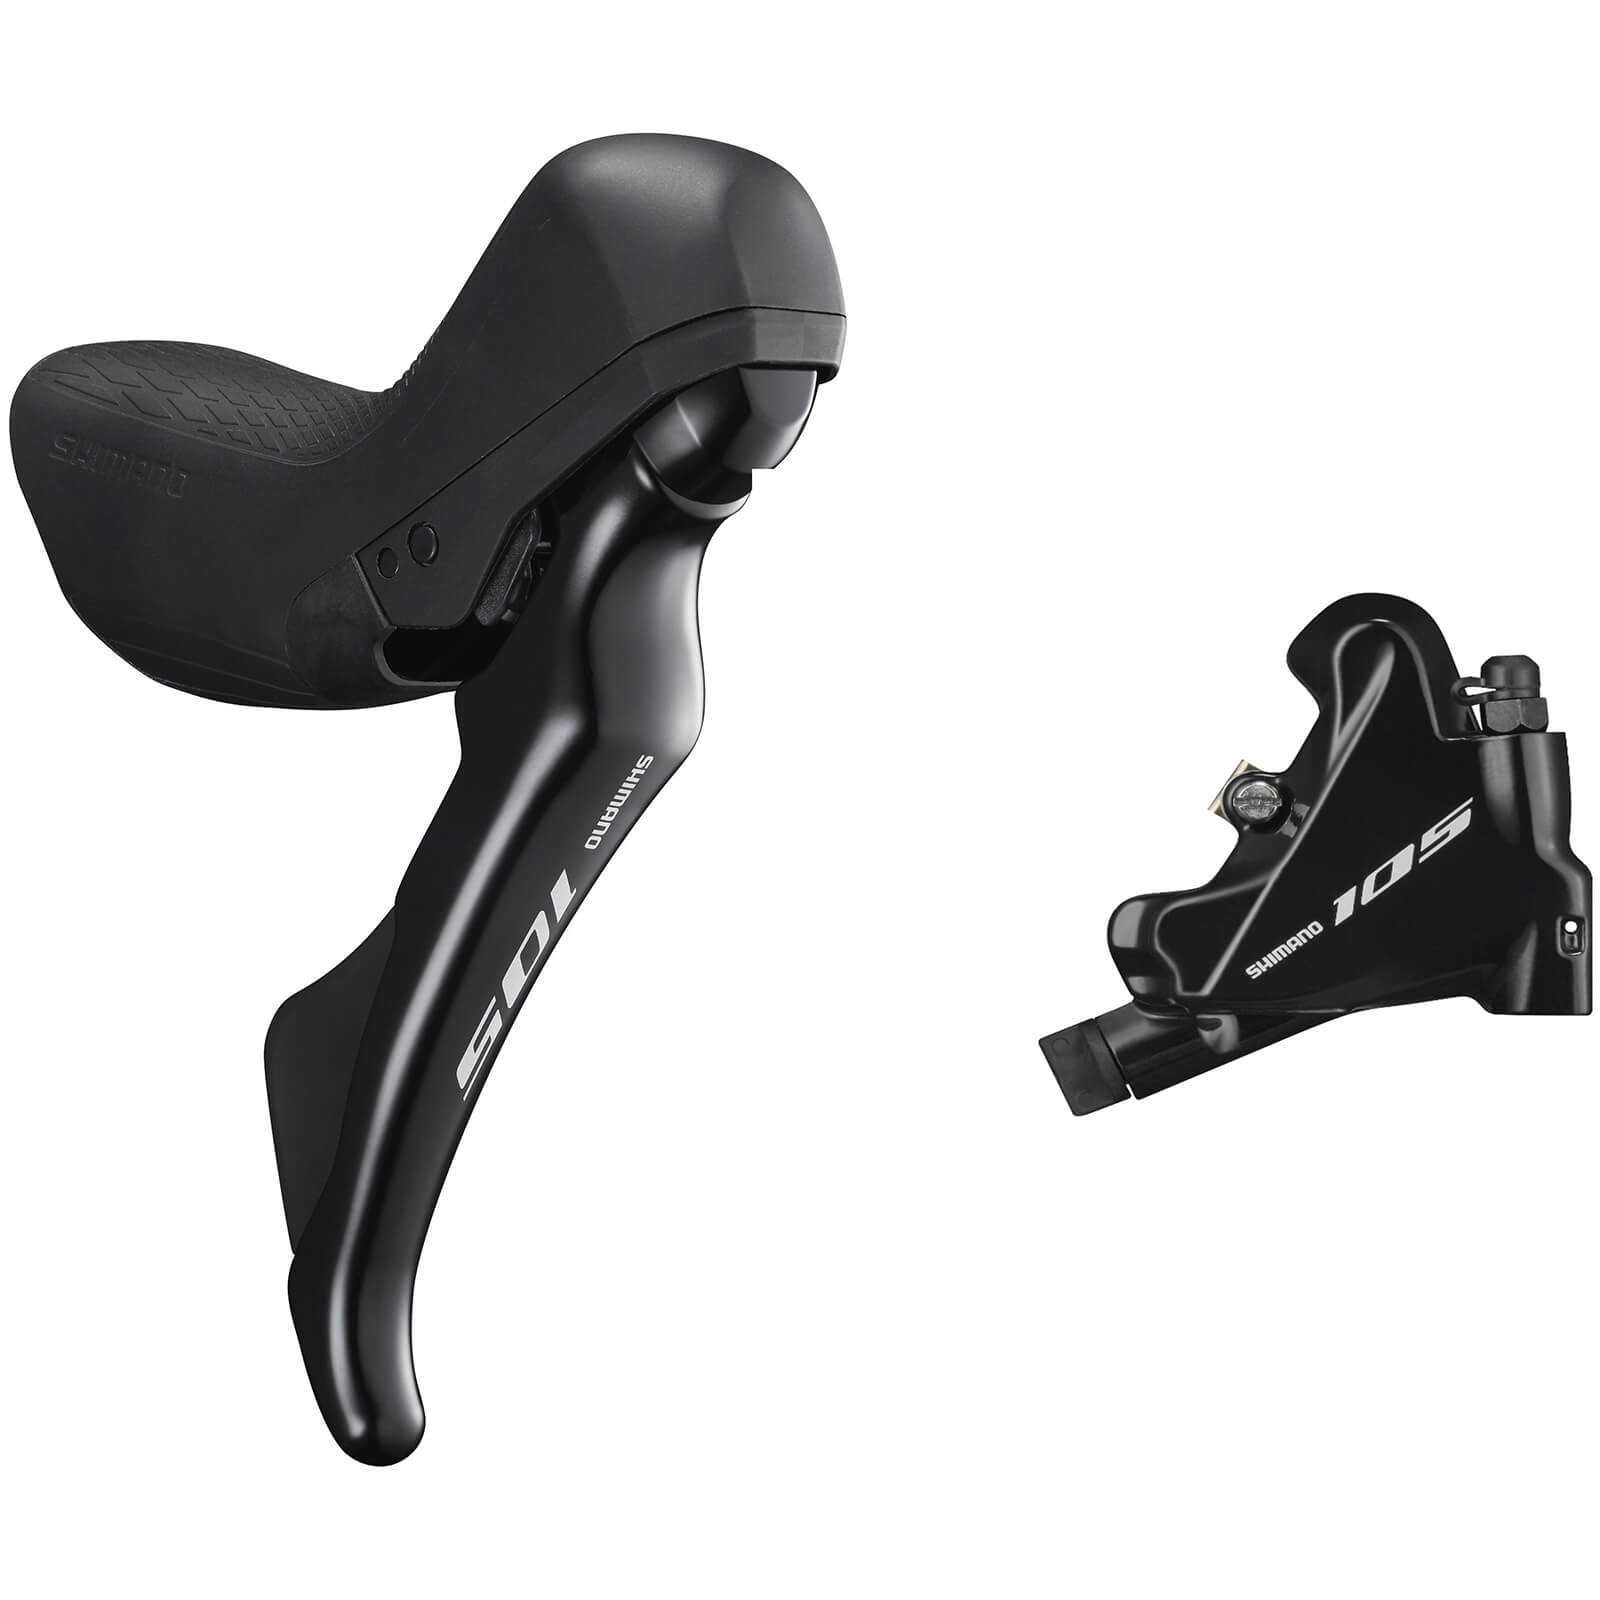 Shimano 105 ST-R7020 Hydraulic Brakes Mechanical Shifters with BR-R7070 Flat Mount Calipers - Right Front - Schwarz